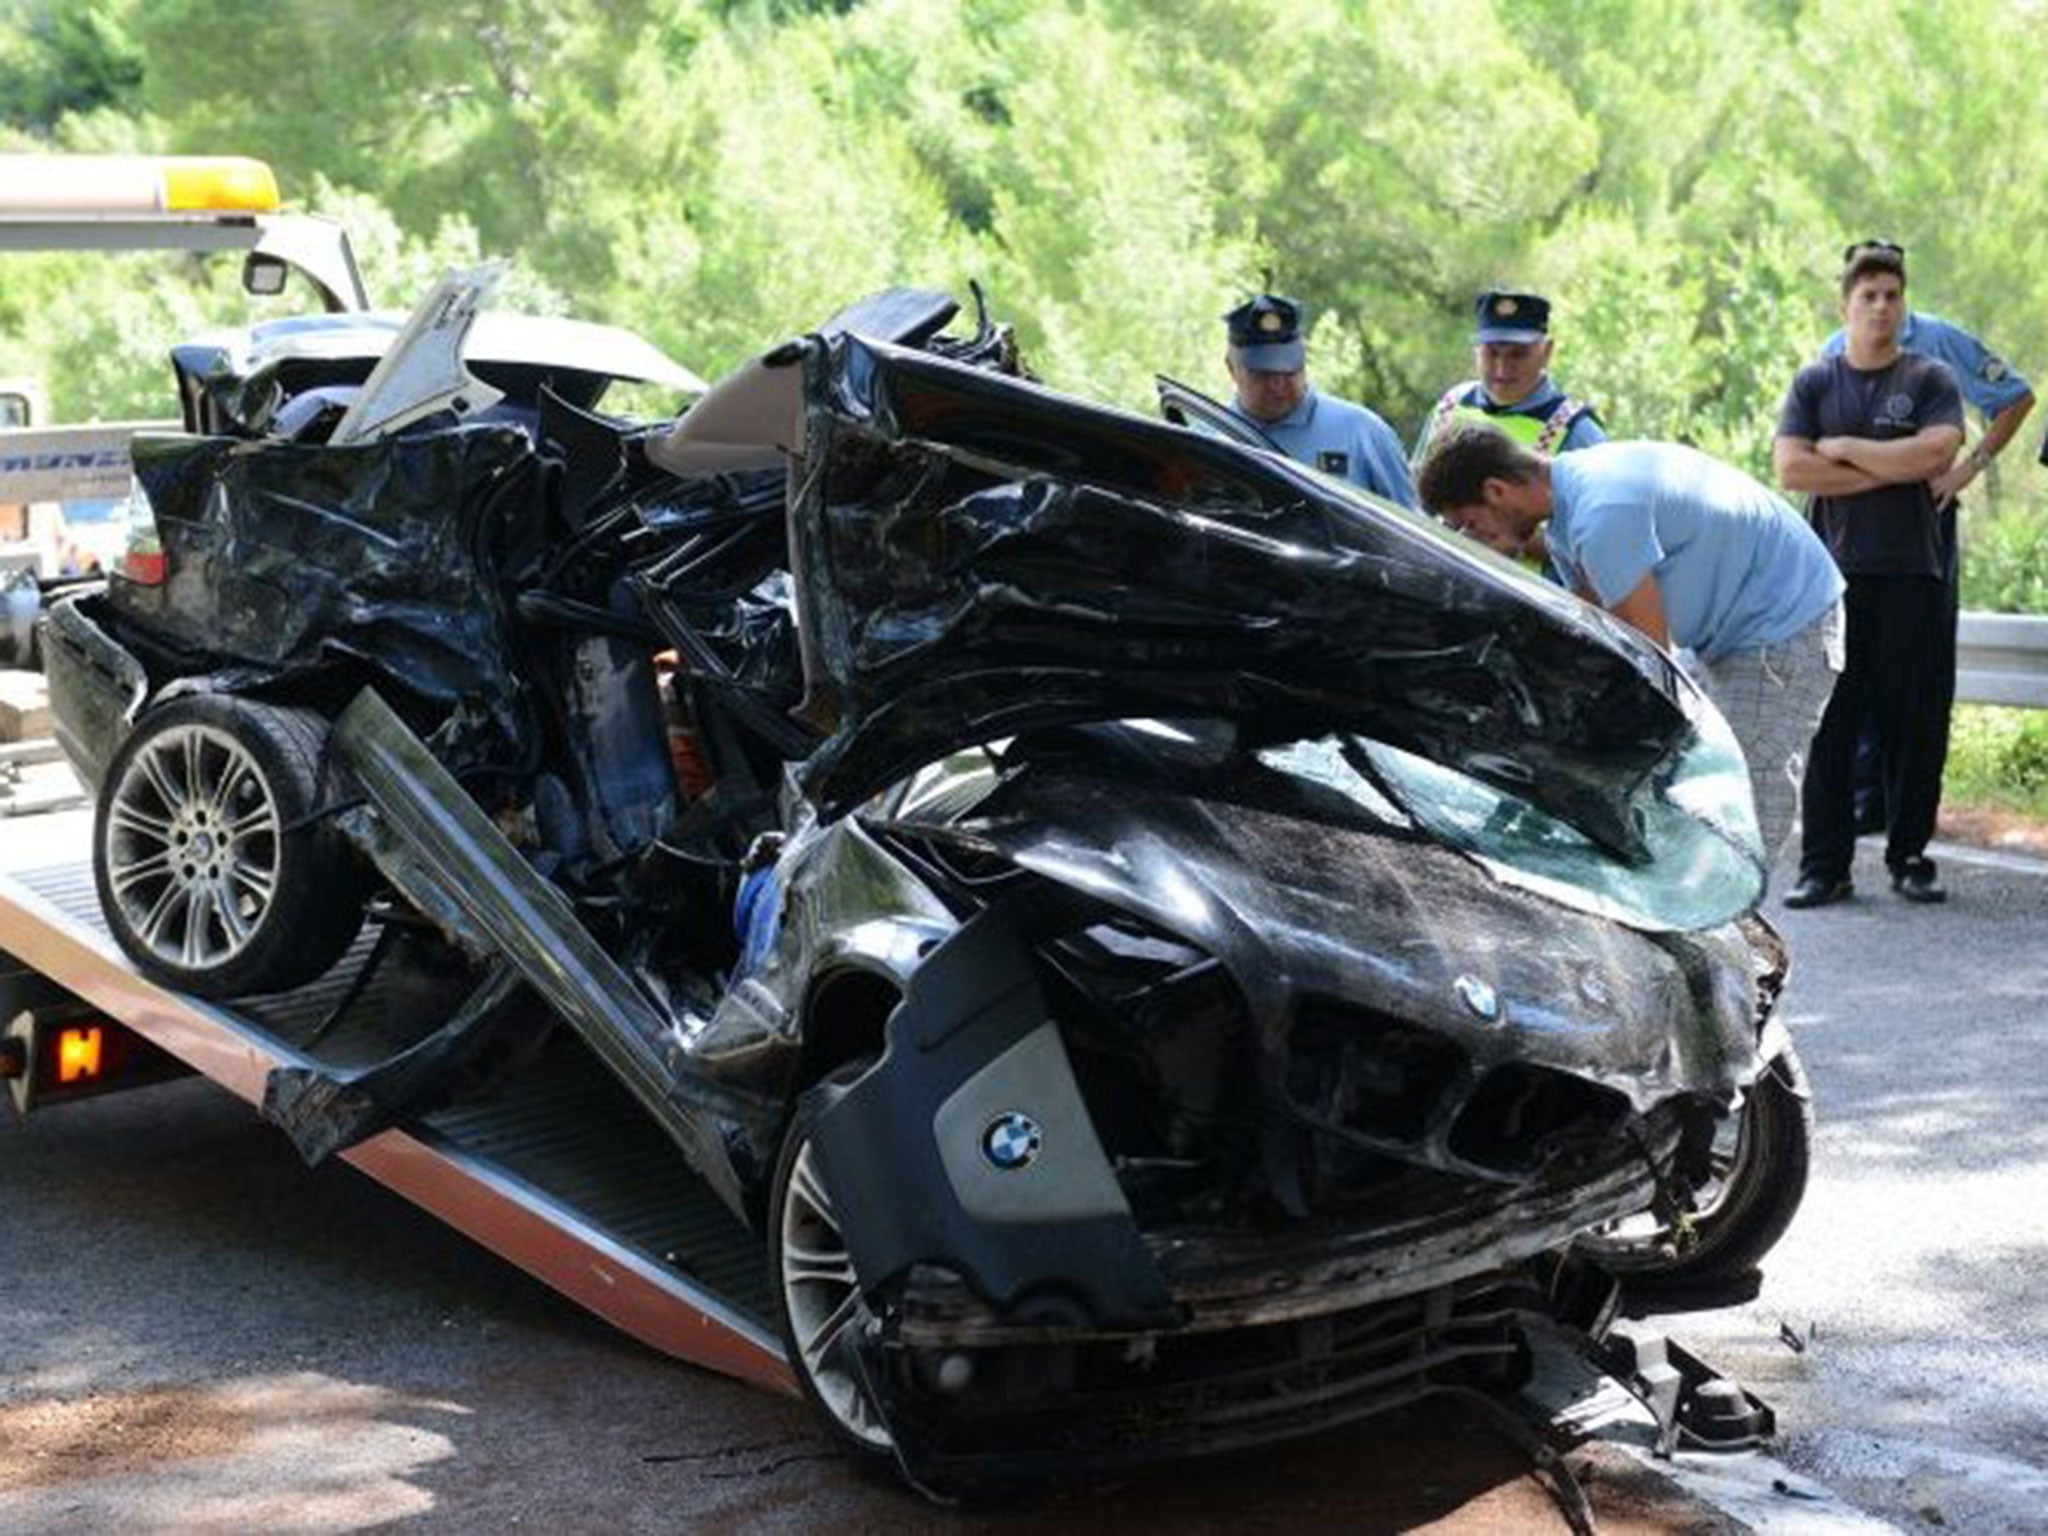 Three members of a British family of five have died after their car crashed near the village of Slano in southern Croatia. The crash left two children and their father dead, and the man's wife and a third child critically injured.